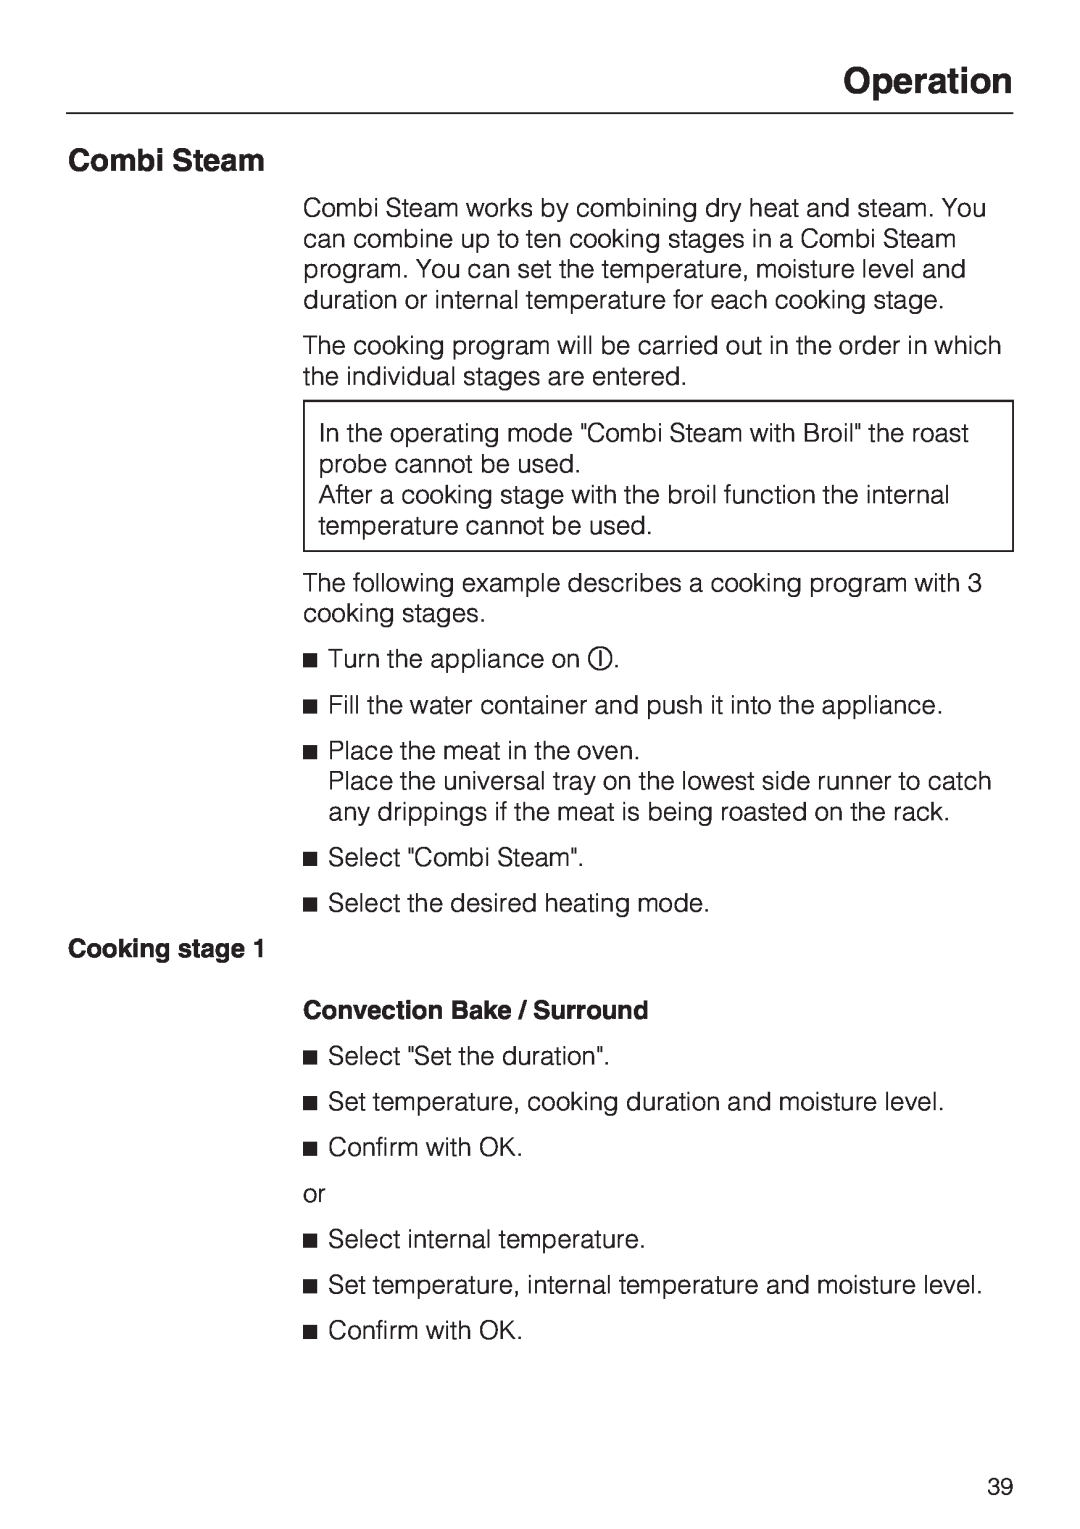 Miele 09 855 050 installation instructions Combi Steam, Operation, Cooking stage Convection Bake / Surround 